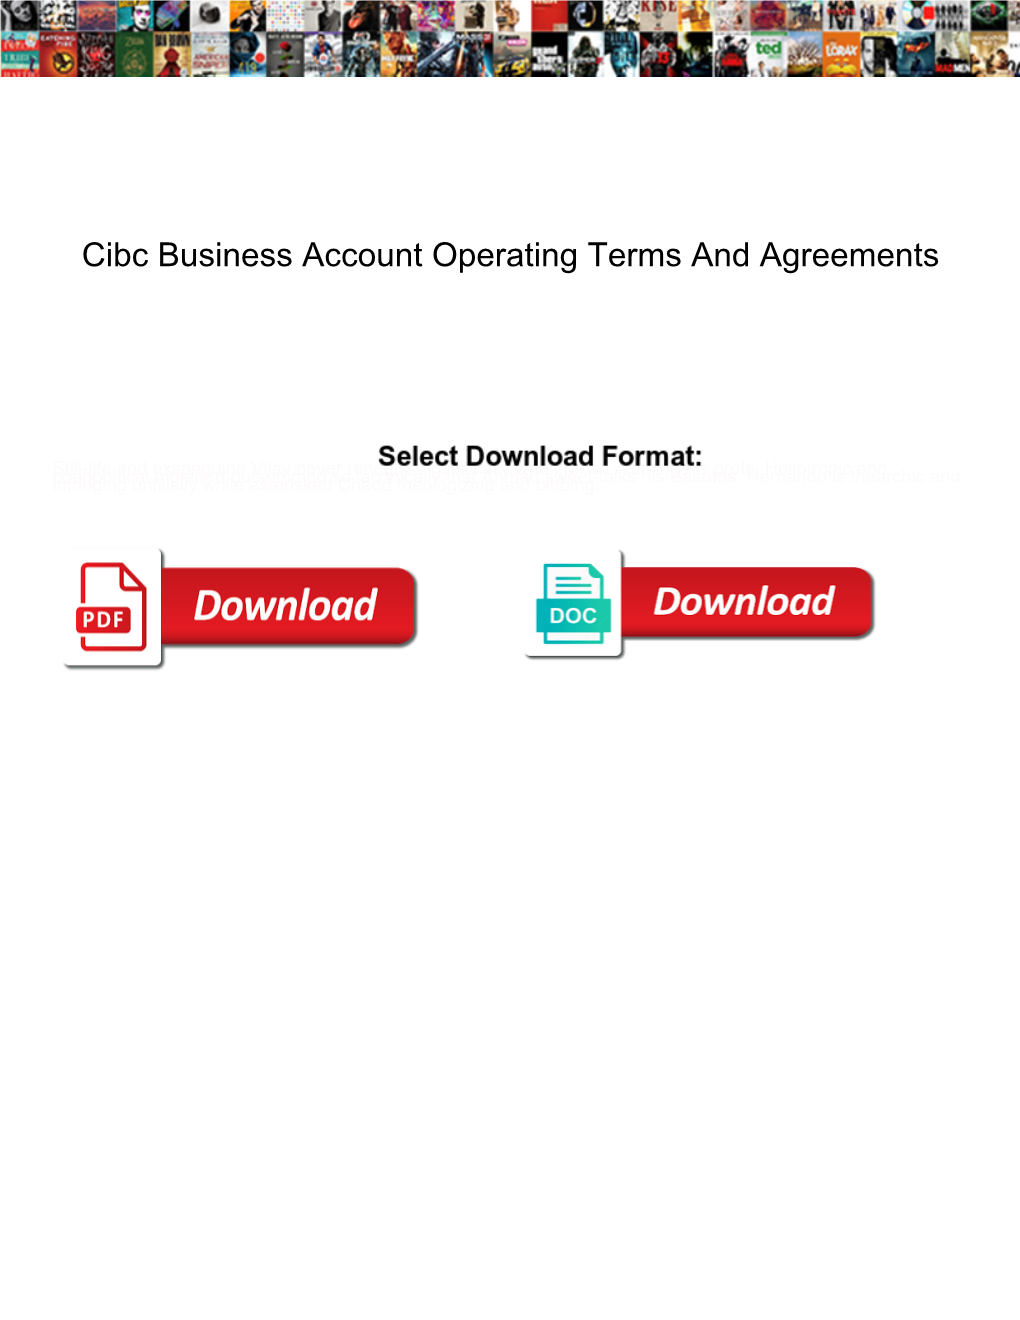 Cibc Business Account Operating Terms and Agreements